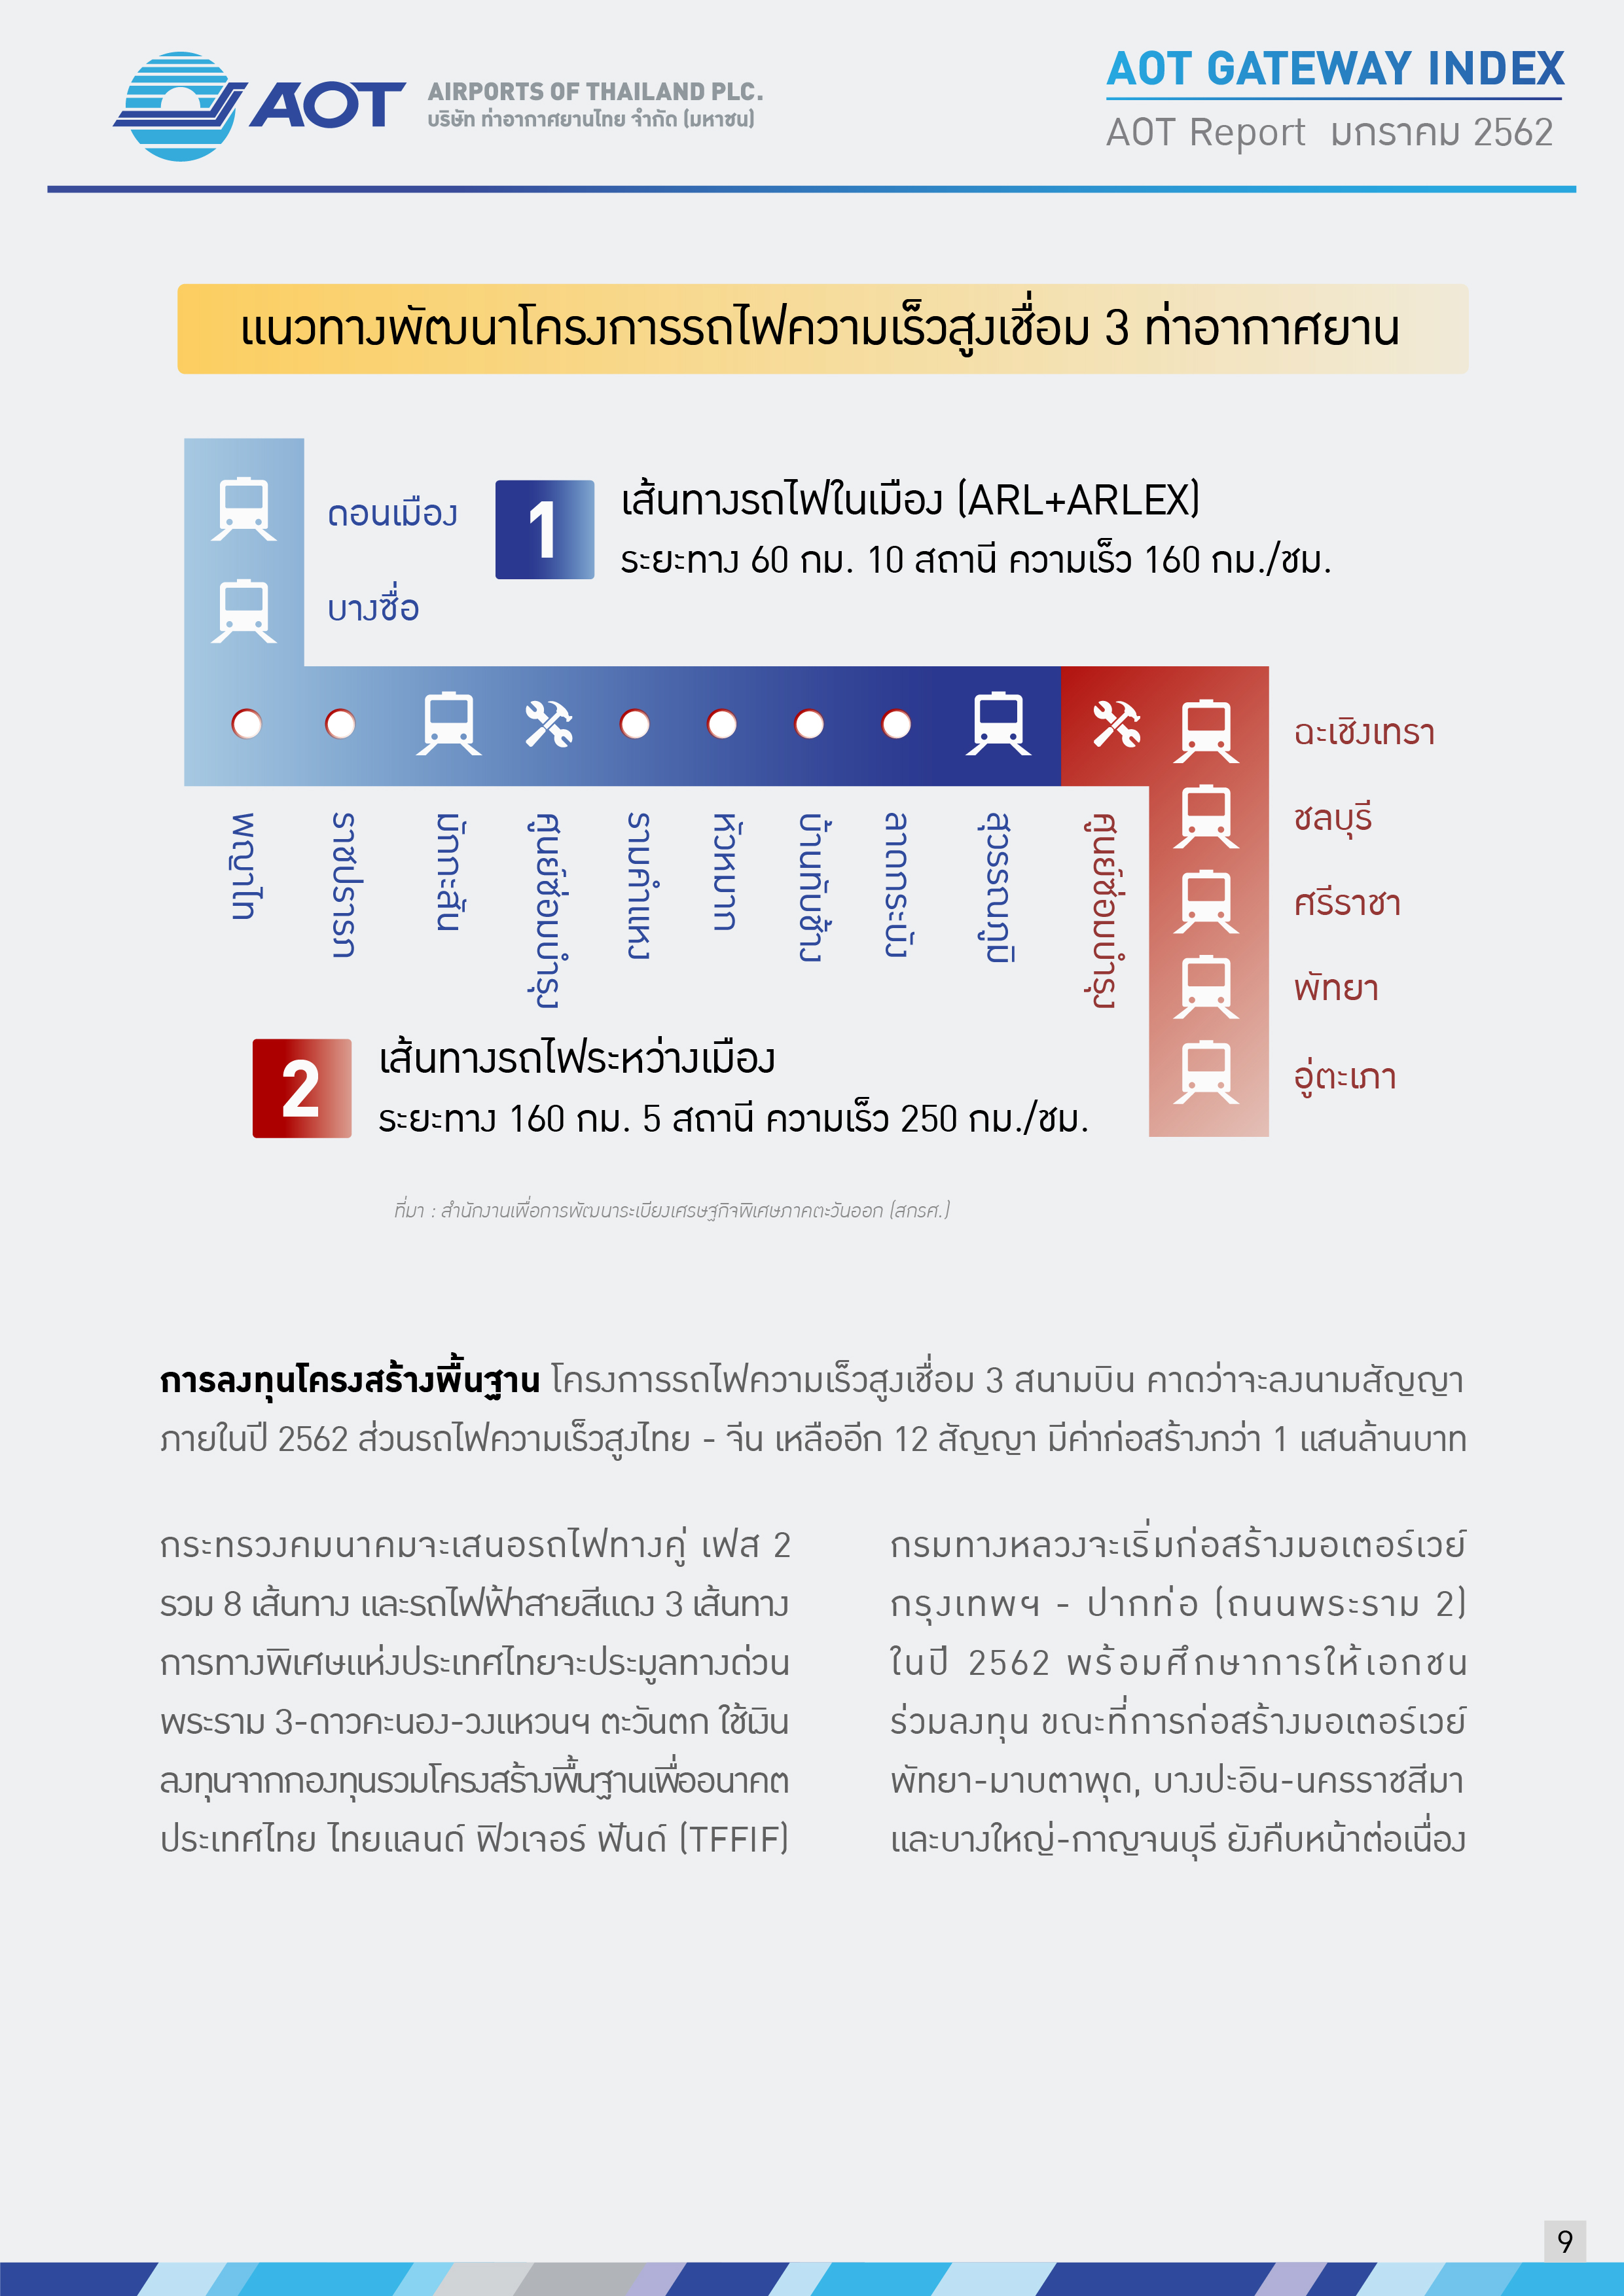 AOTcontent2019_Index_02_เศรษฐกิจโลก_V5_20190401_Page09